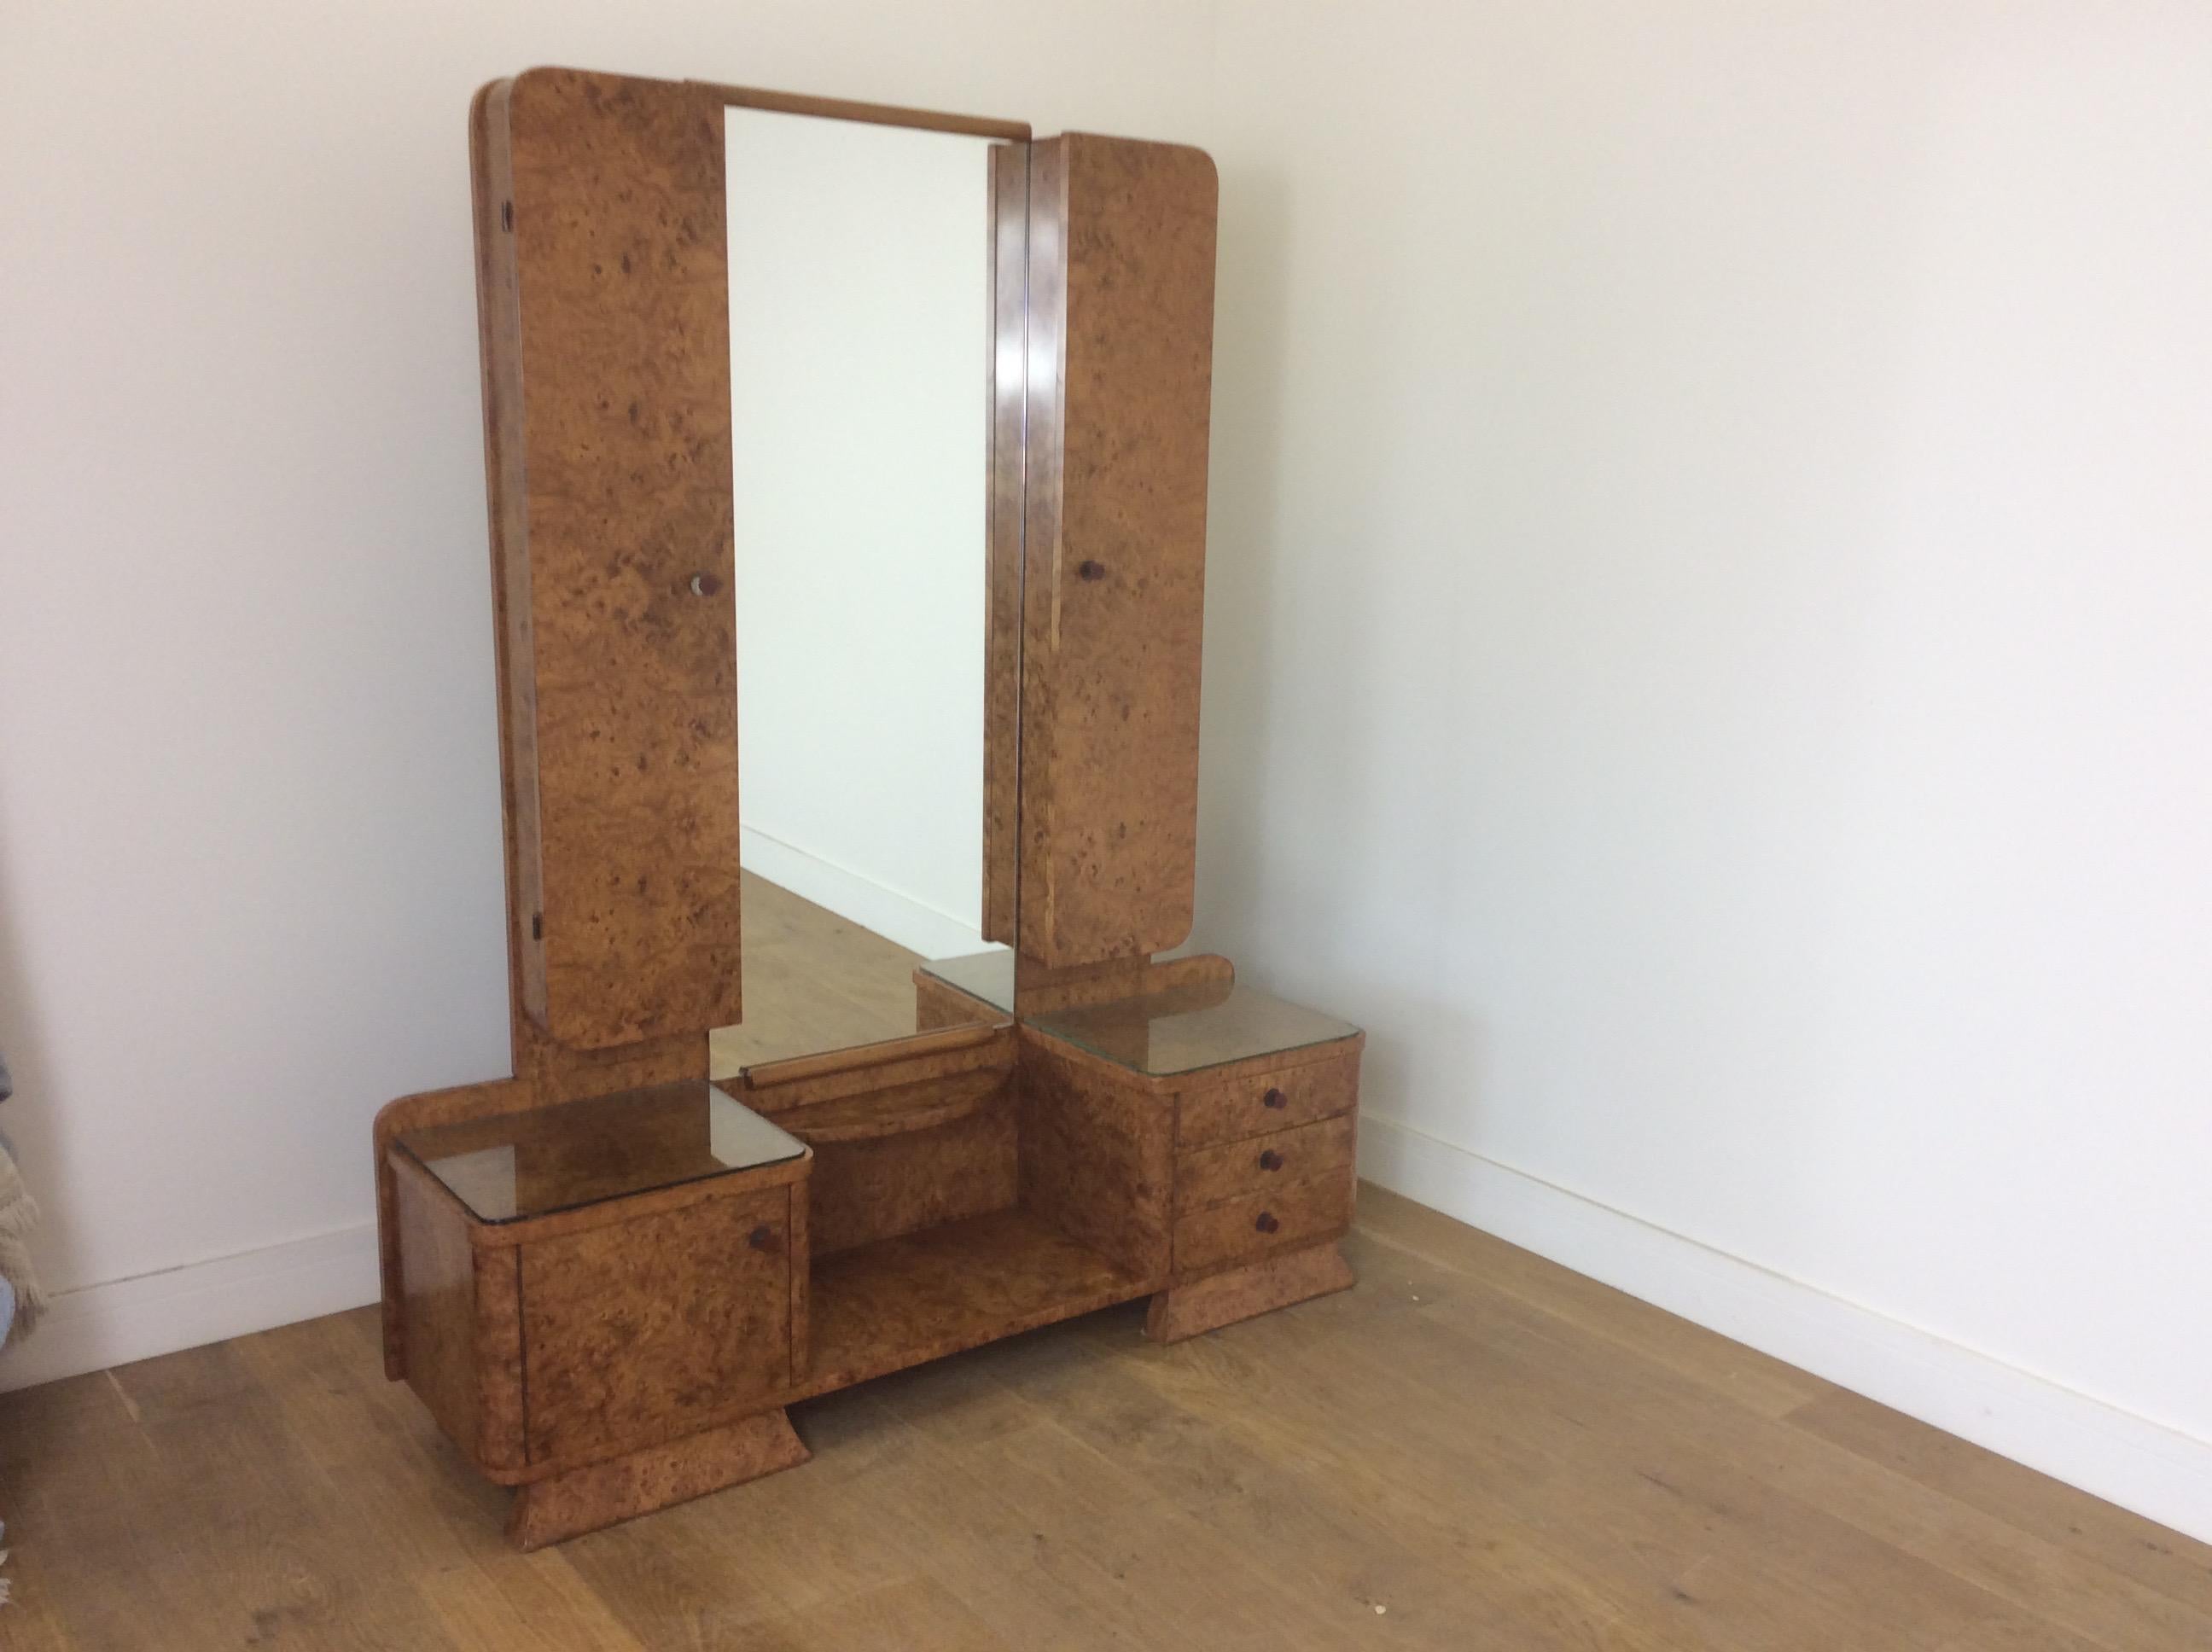 British Art Deco Dressing Table in a Beautiful Bird's-Eye Maple For Sale